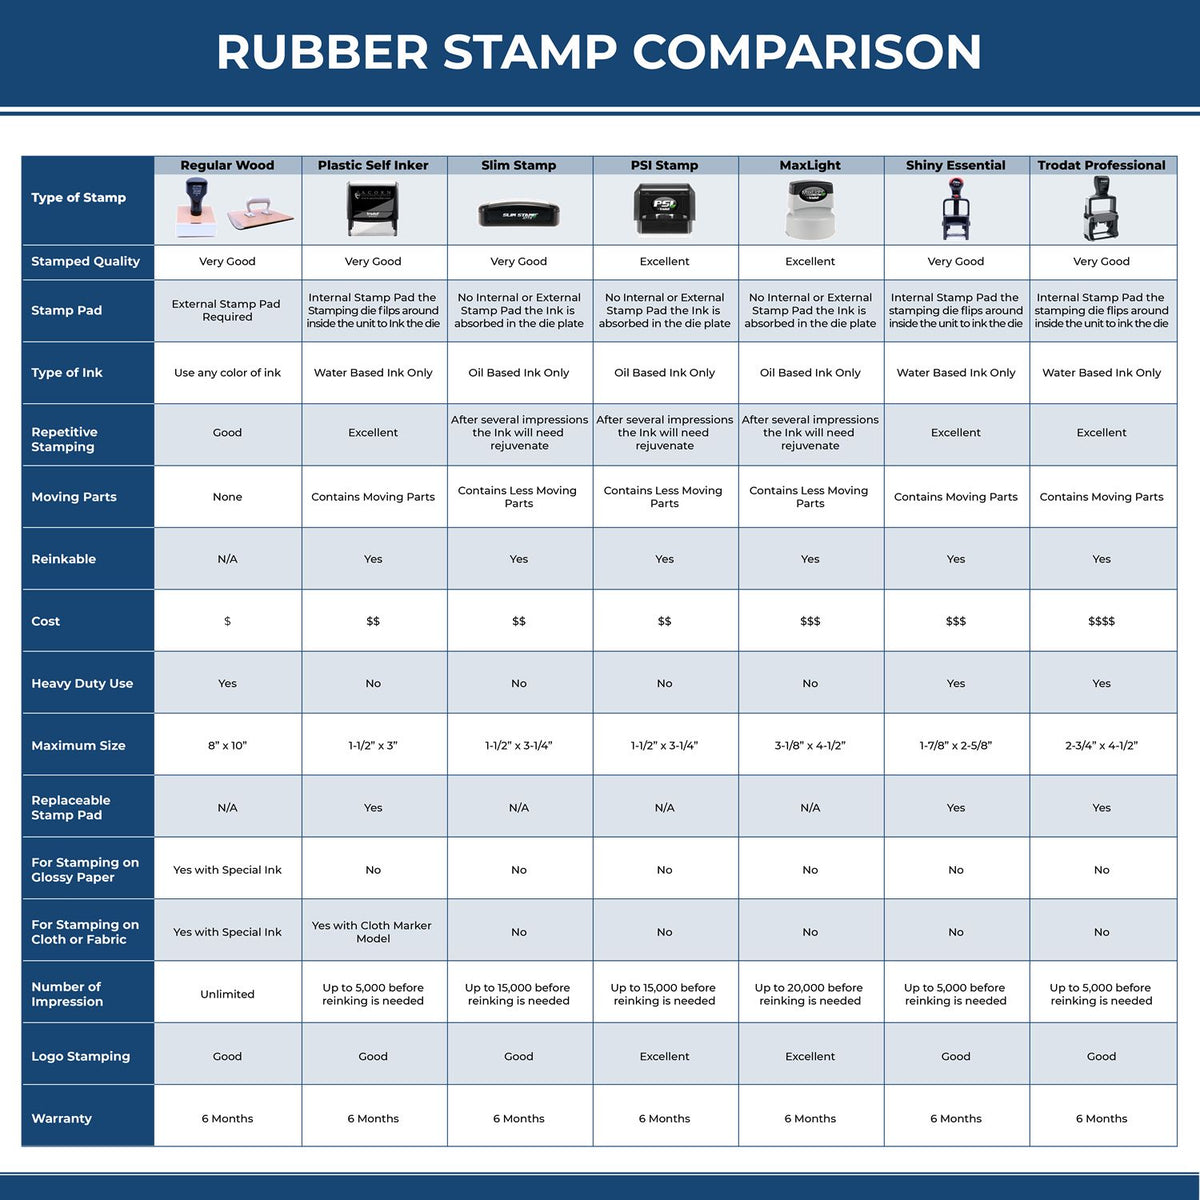 A comparison chart for the different types of mount models available for the MaxLight Premium Pre-Inked South Dakota Rectangular Notarial Stamp.